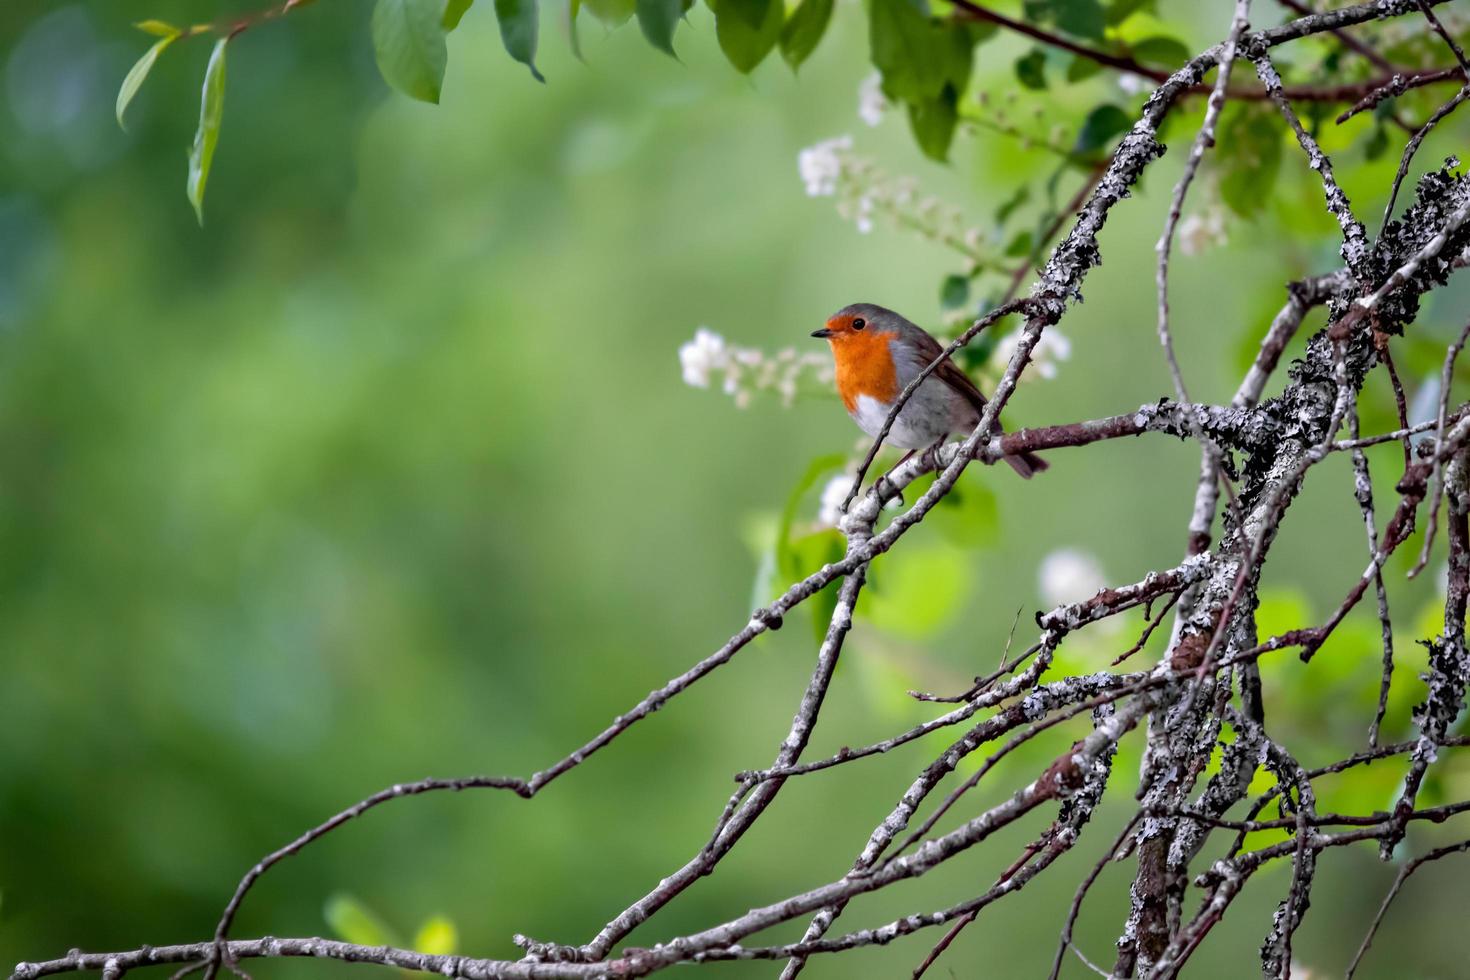 Robin perched in a tree photo